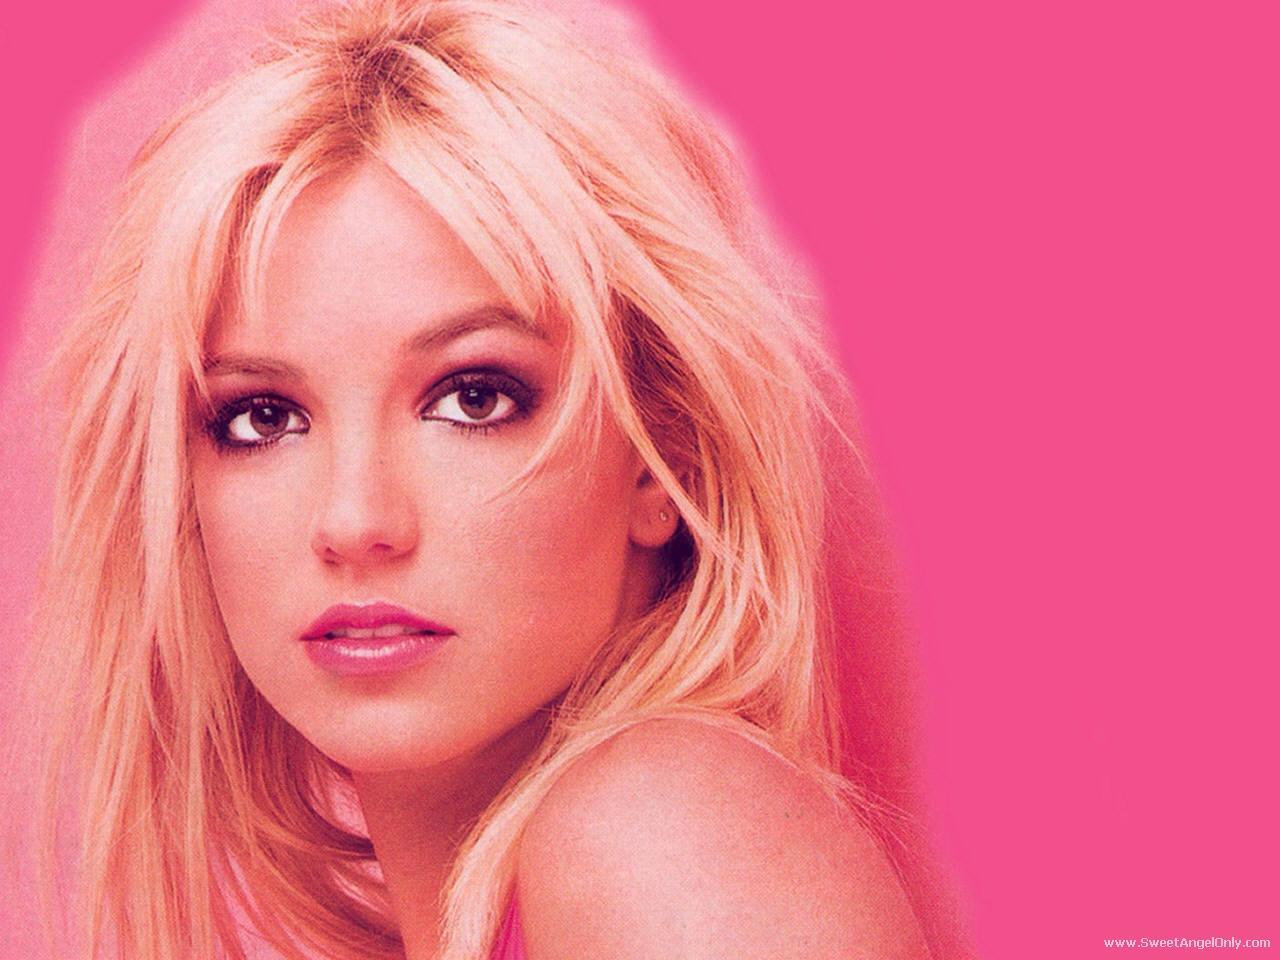 Booty Me Now: Britney Spears Wallpaper-1600x12001280 x 960